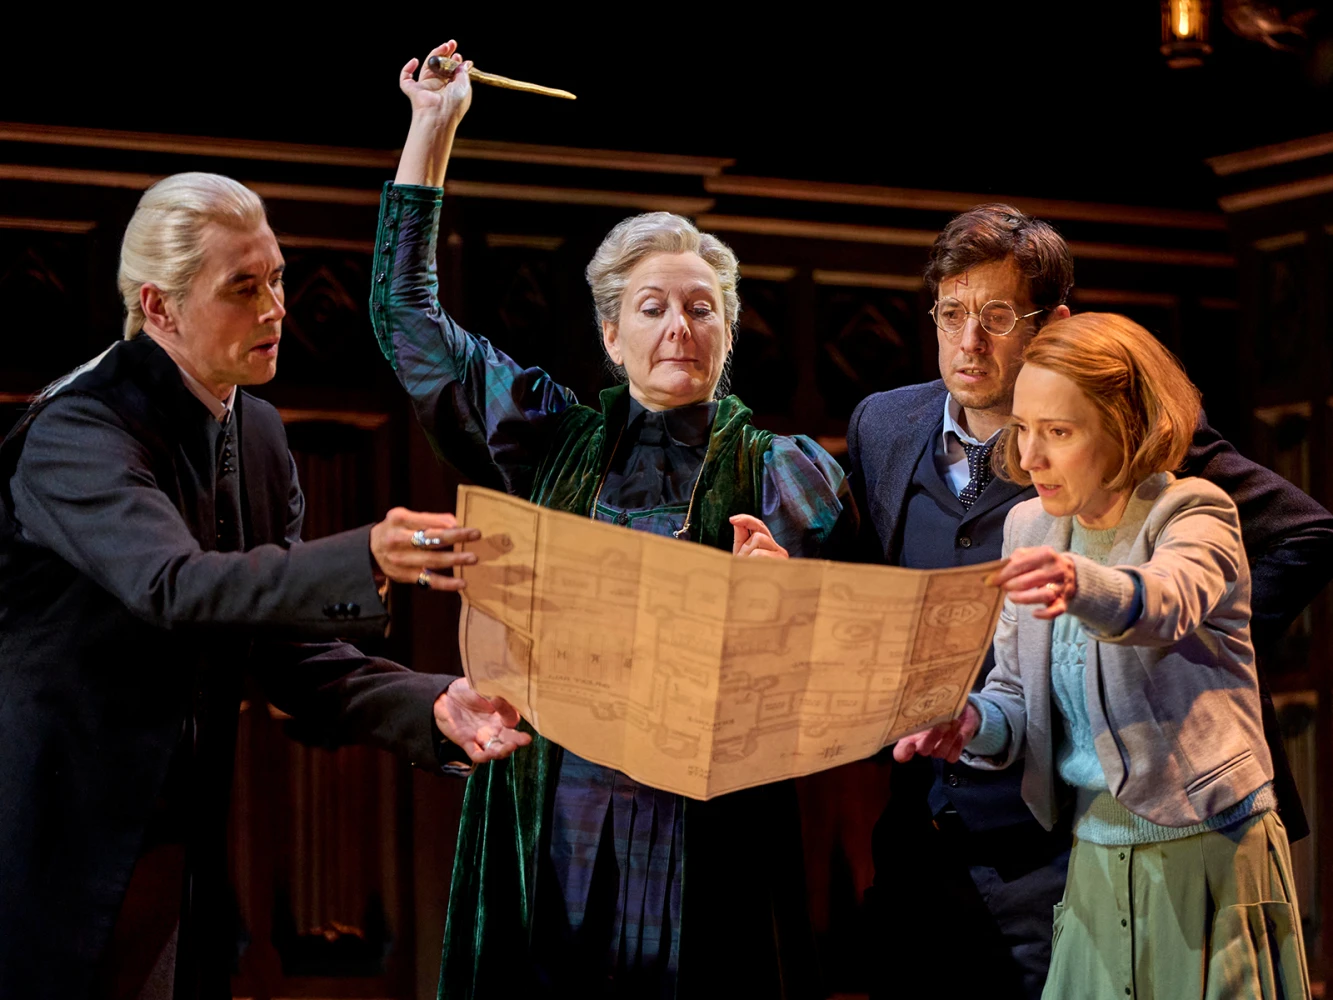 Harry Potter And The Cursed Child: Both Parts: What to expect - 4